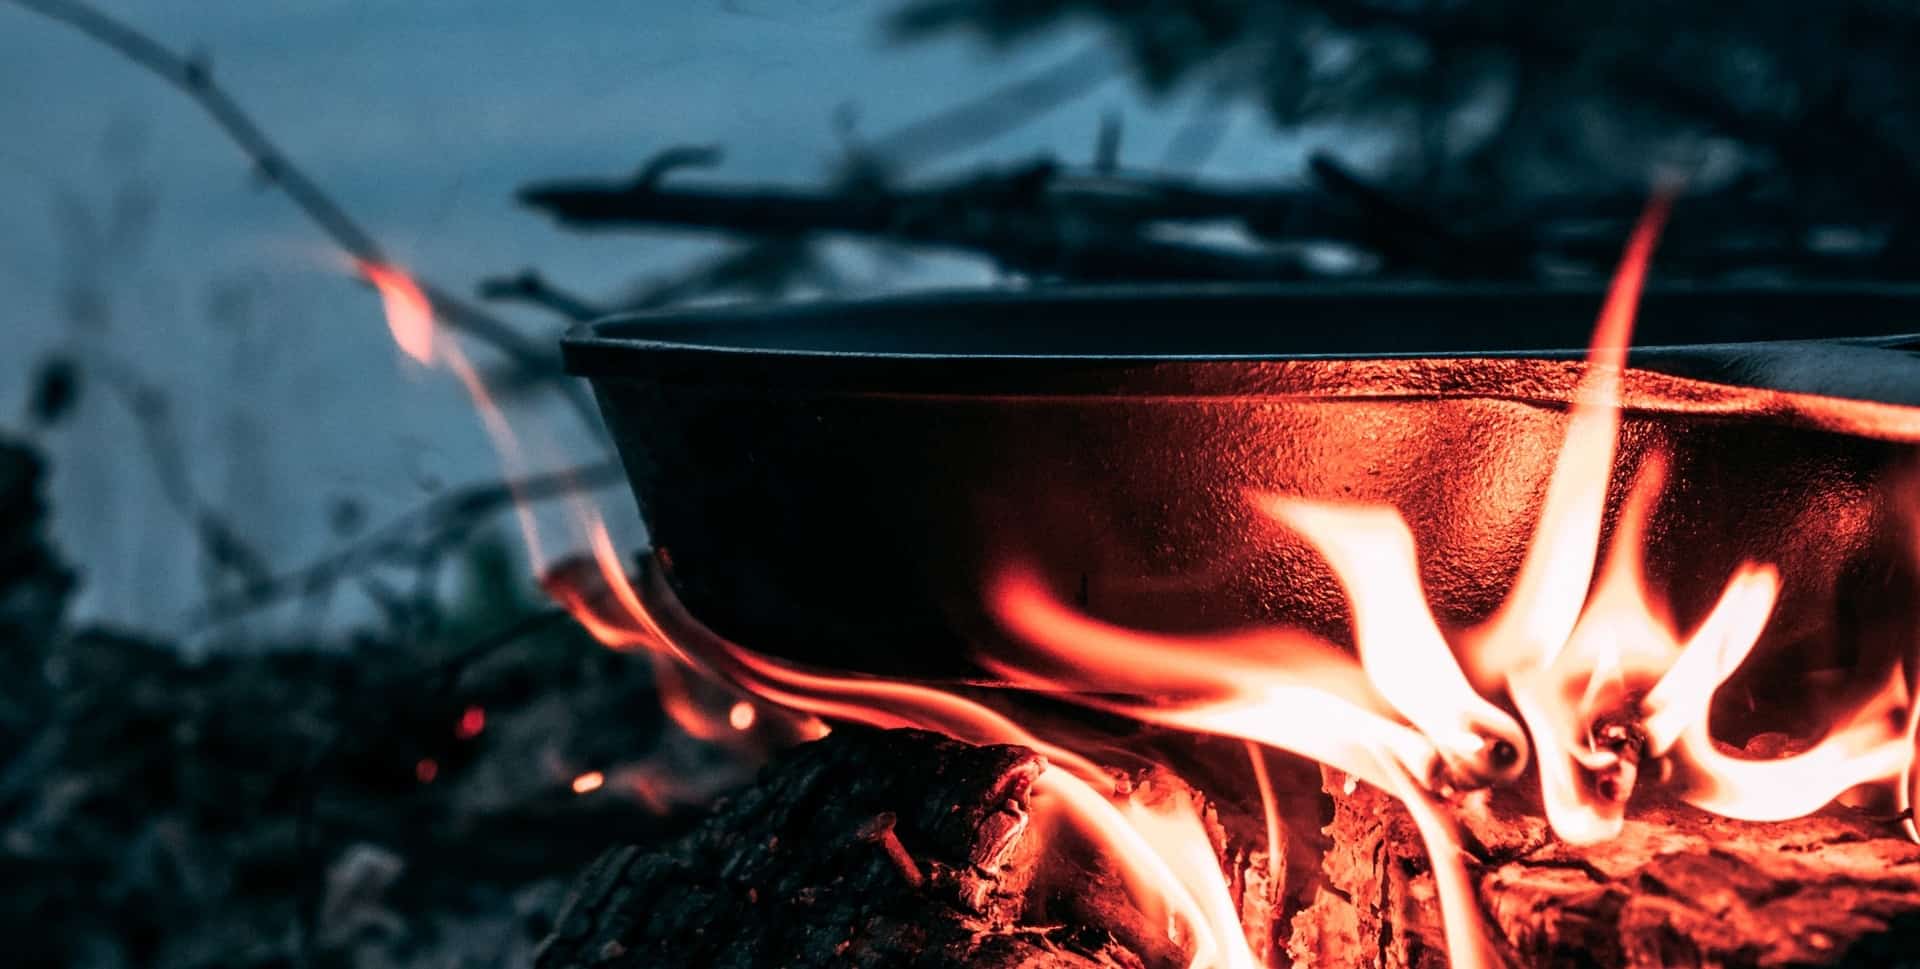 Cast iron pan cooking on the campfire by a lake at dusk.